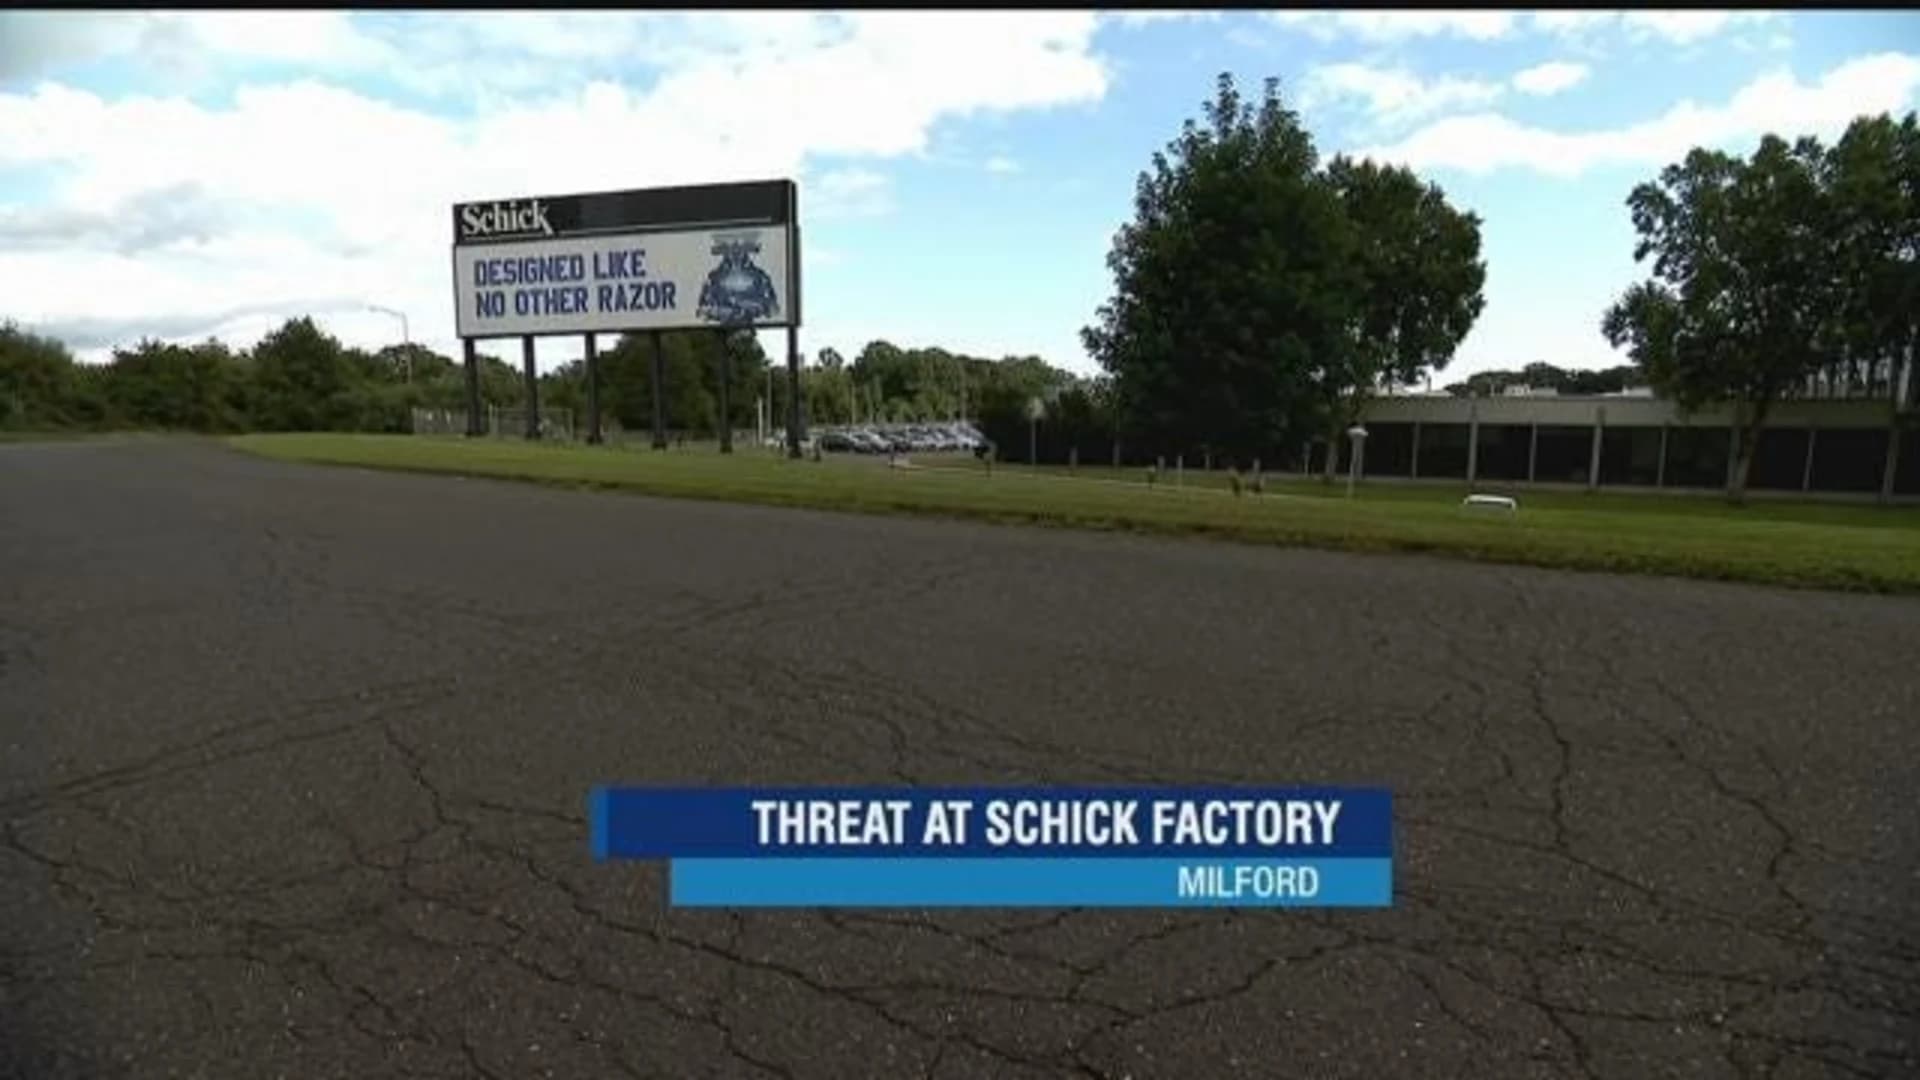 Police: Woman threatened to blow up Schick HQ in Milford